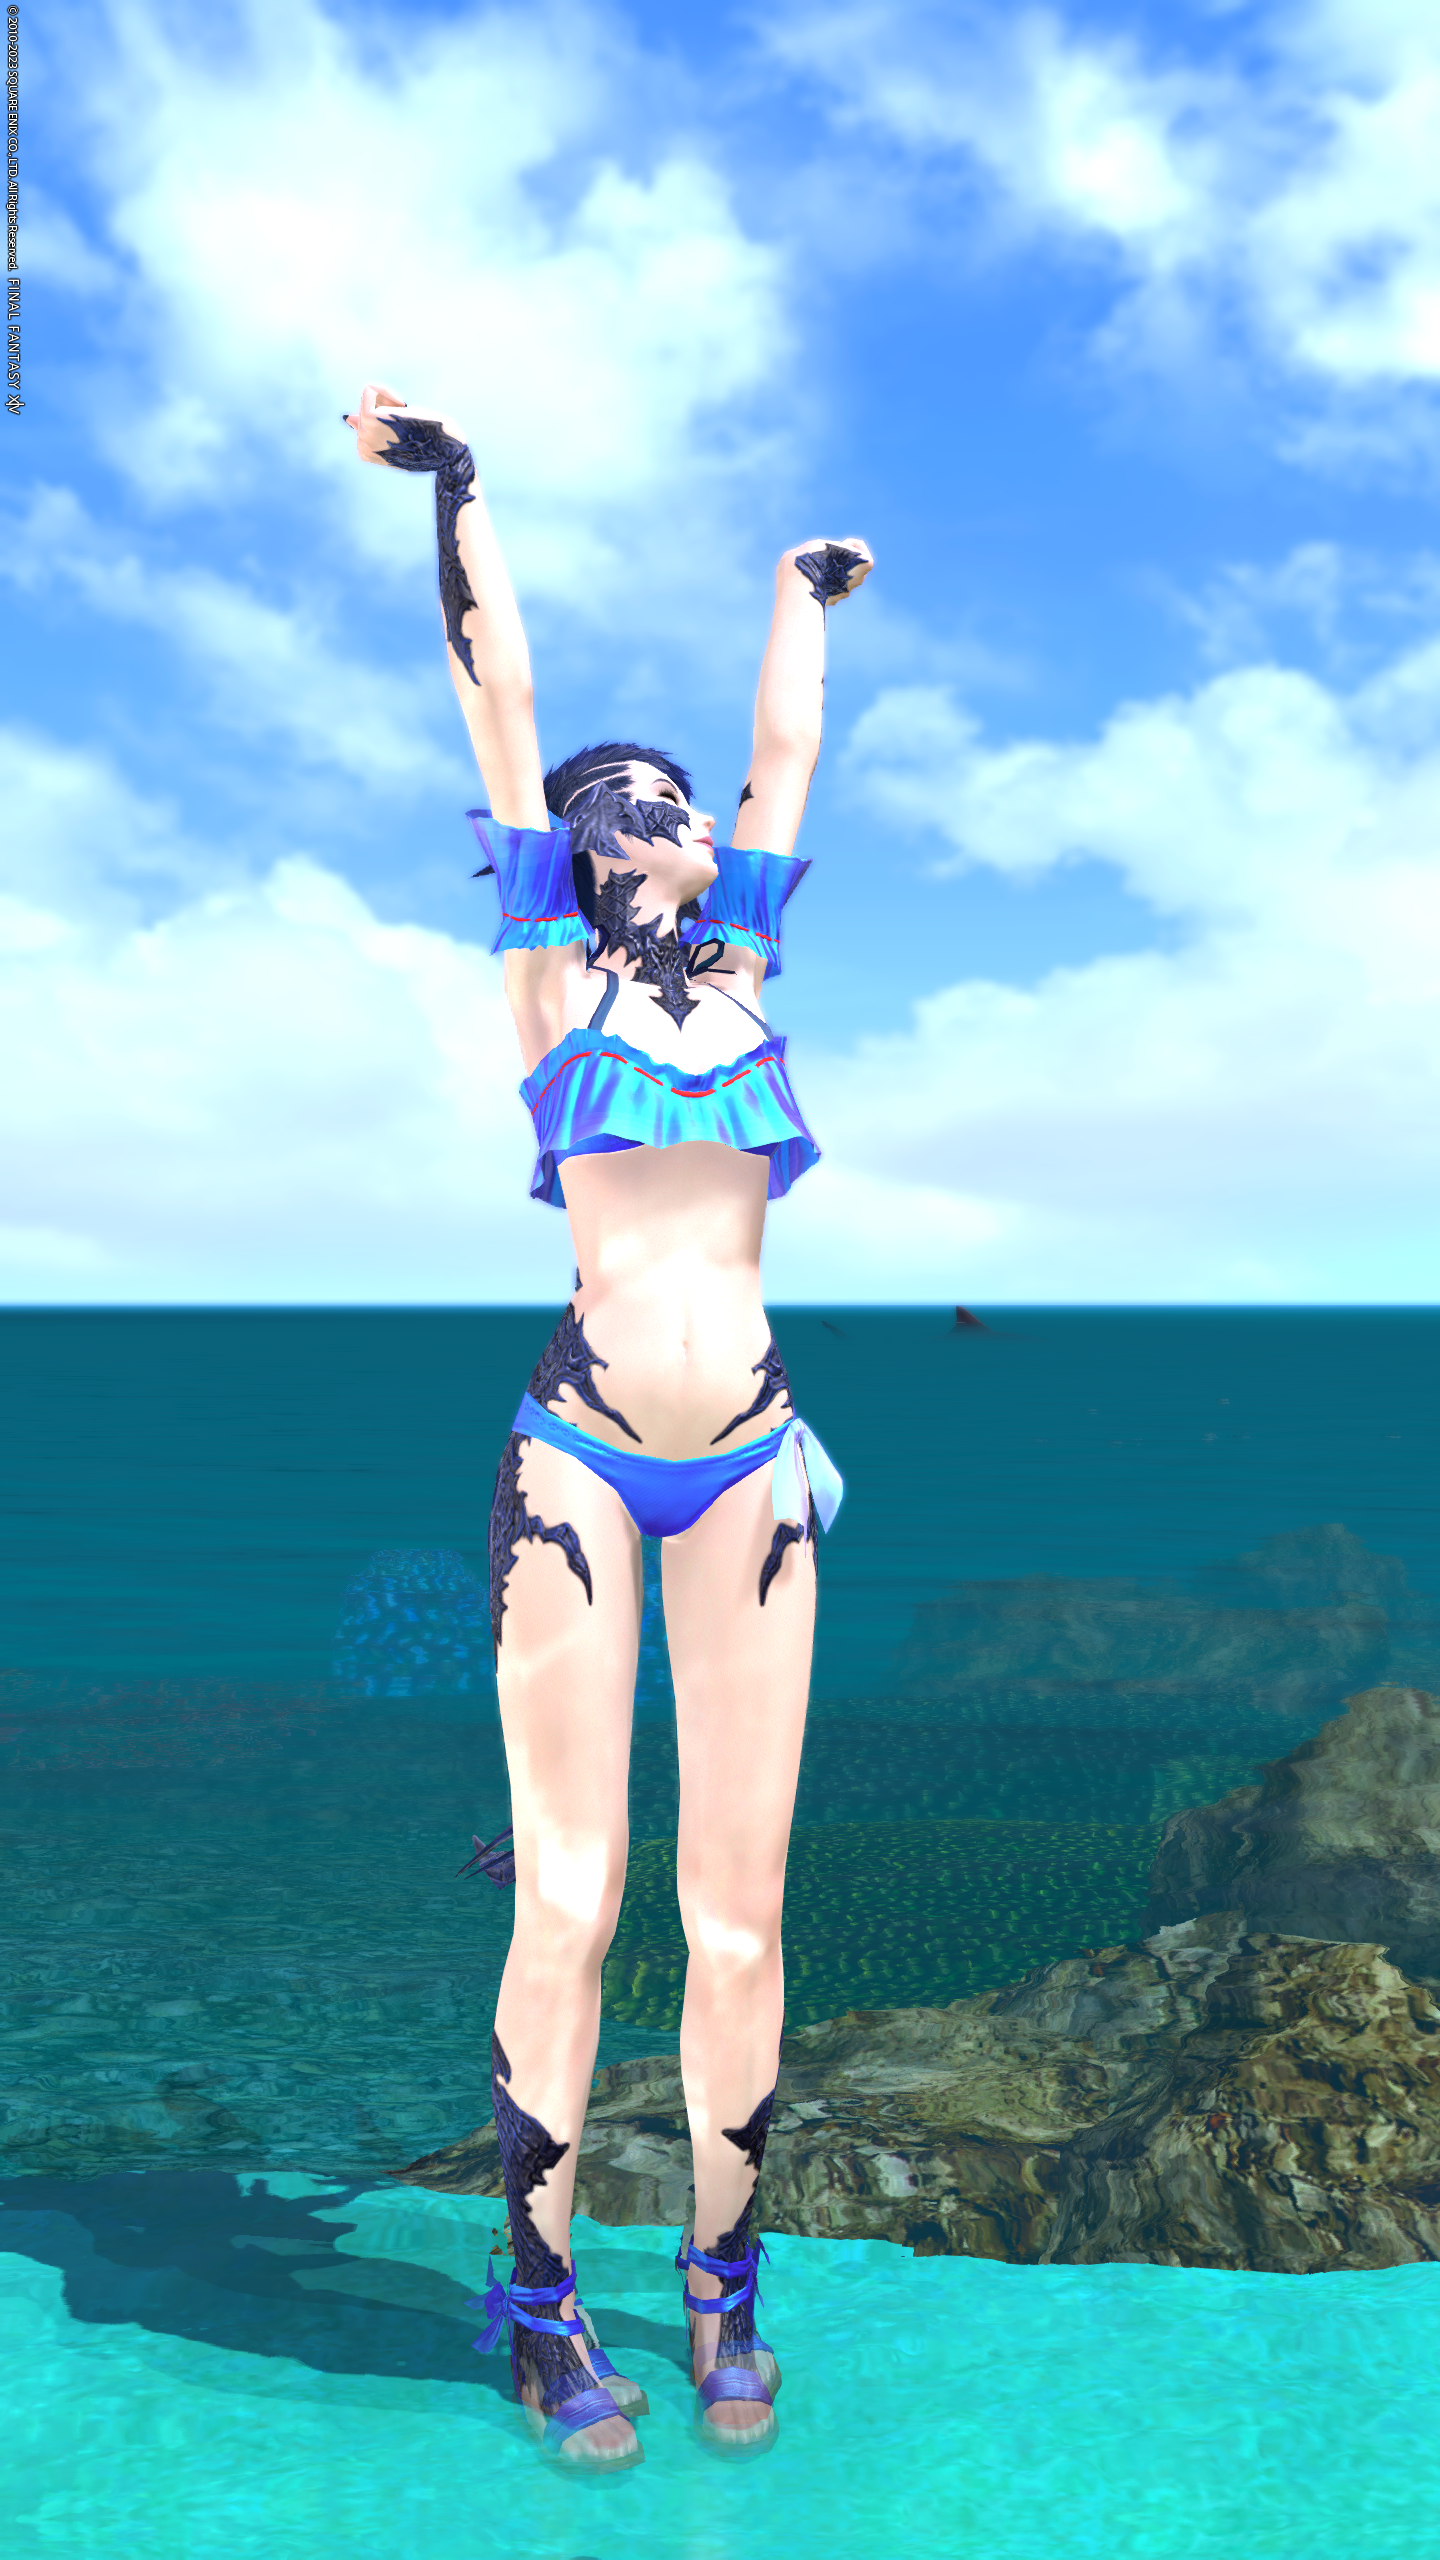 An image of an Au Ra from FFXIV. She is wearing a blue bathing suit and standing in front of the ocean while stretching. A shark looms in the water behind her.